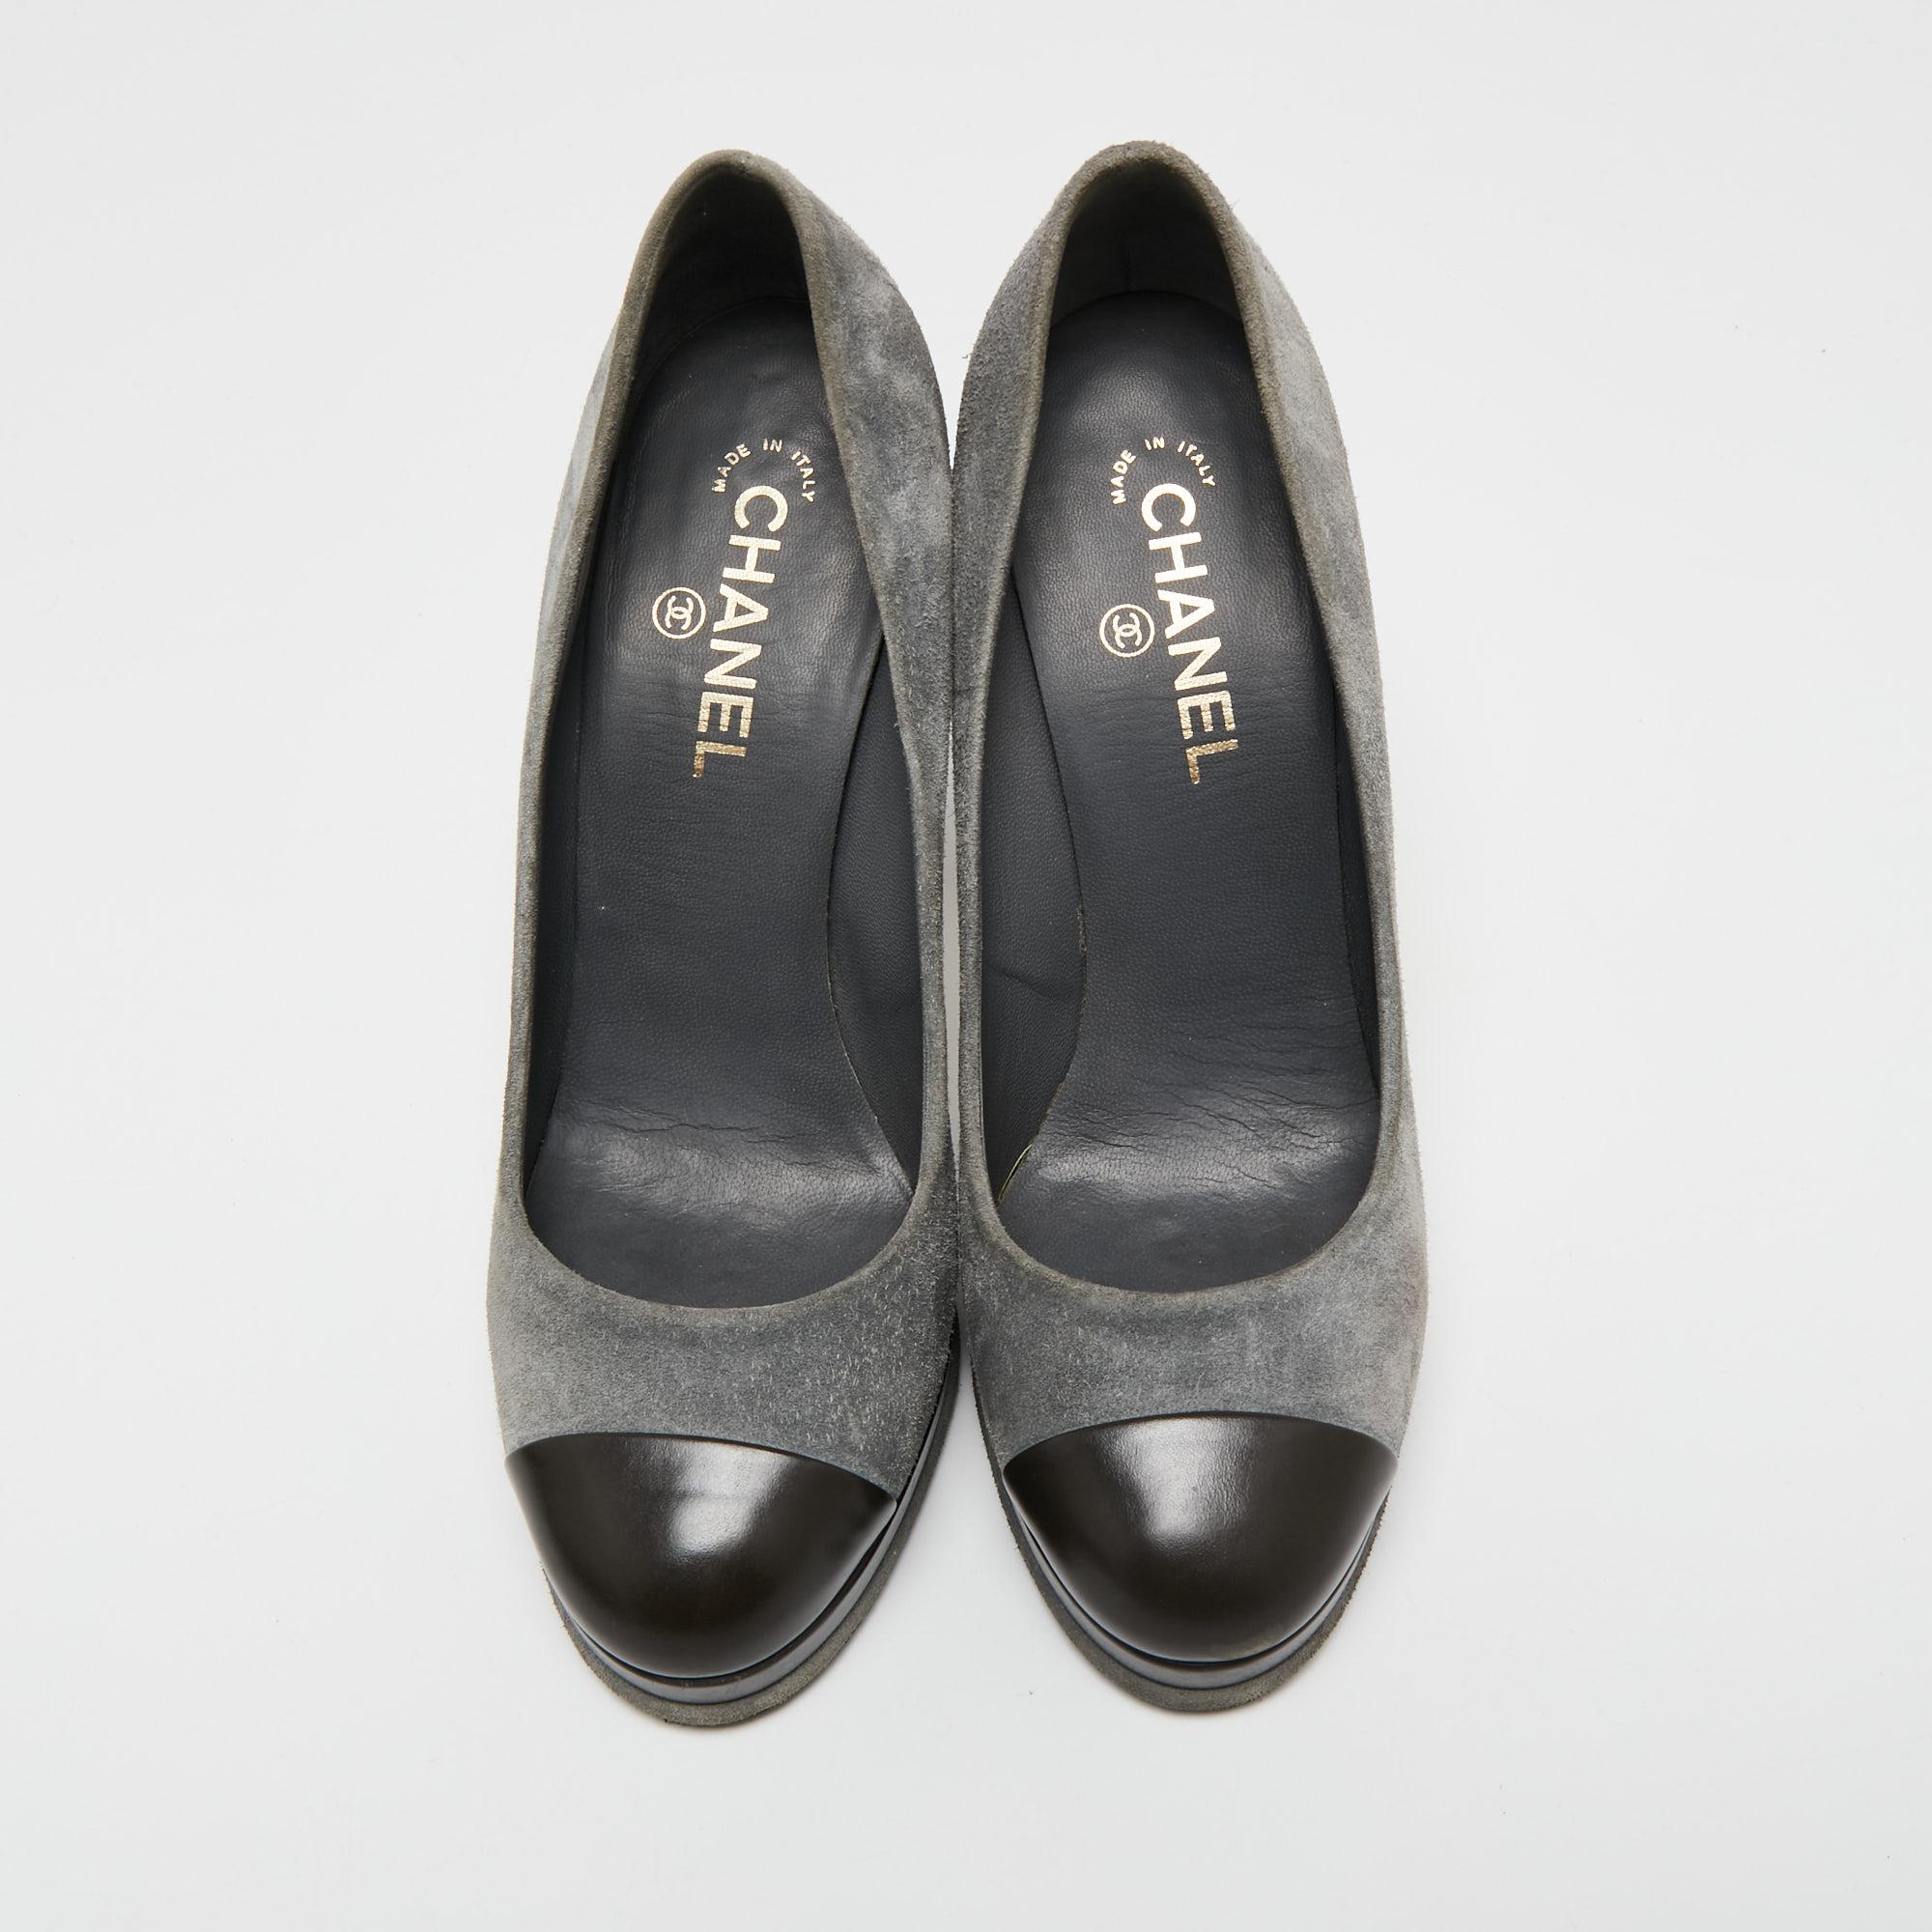 This pair of Chanel pumps is the epitome of sophistication and feminine style. Crafted from suede and leather, it is equipped with contrasting cap toes and its branded heels are mounted on platforms to lend you the required support.

Includes: